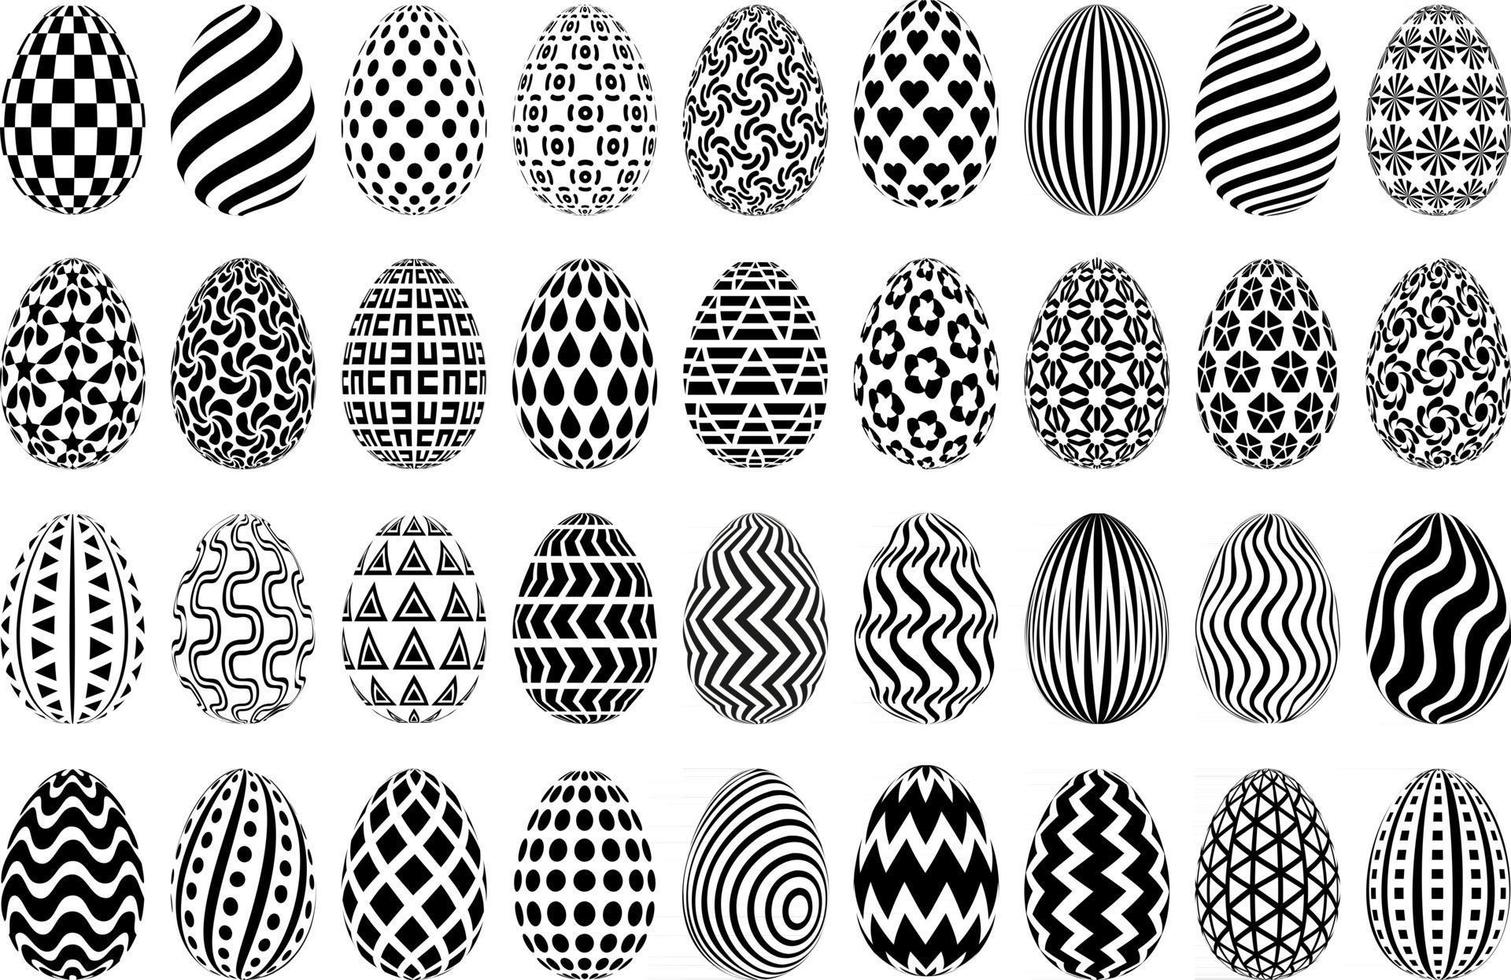 Black and white Easter egg illustrations set. Collection of stylized Easter eggs. Monochrome patterned decorative eggs isolated on white background. vector